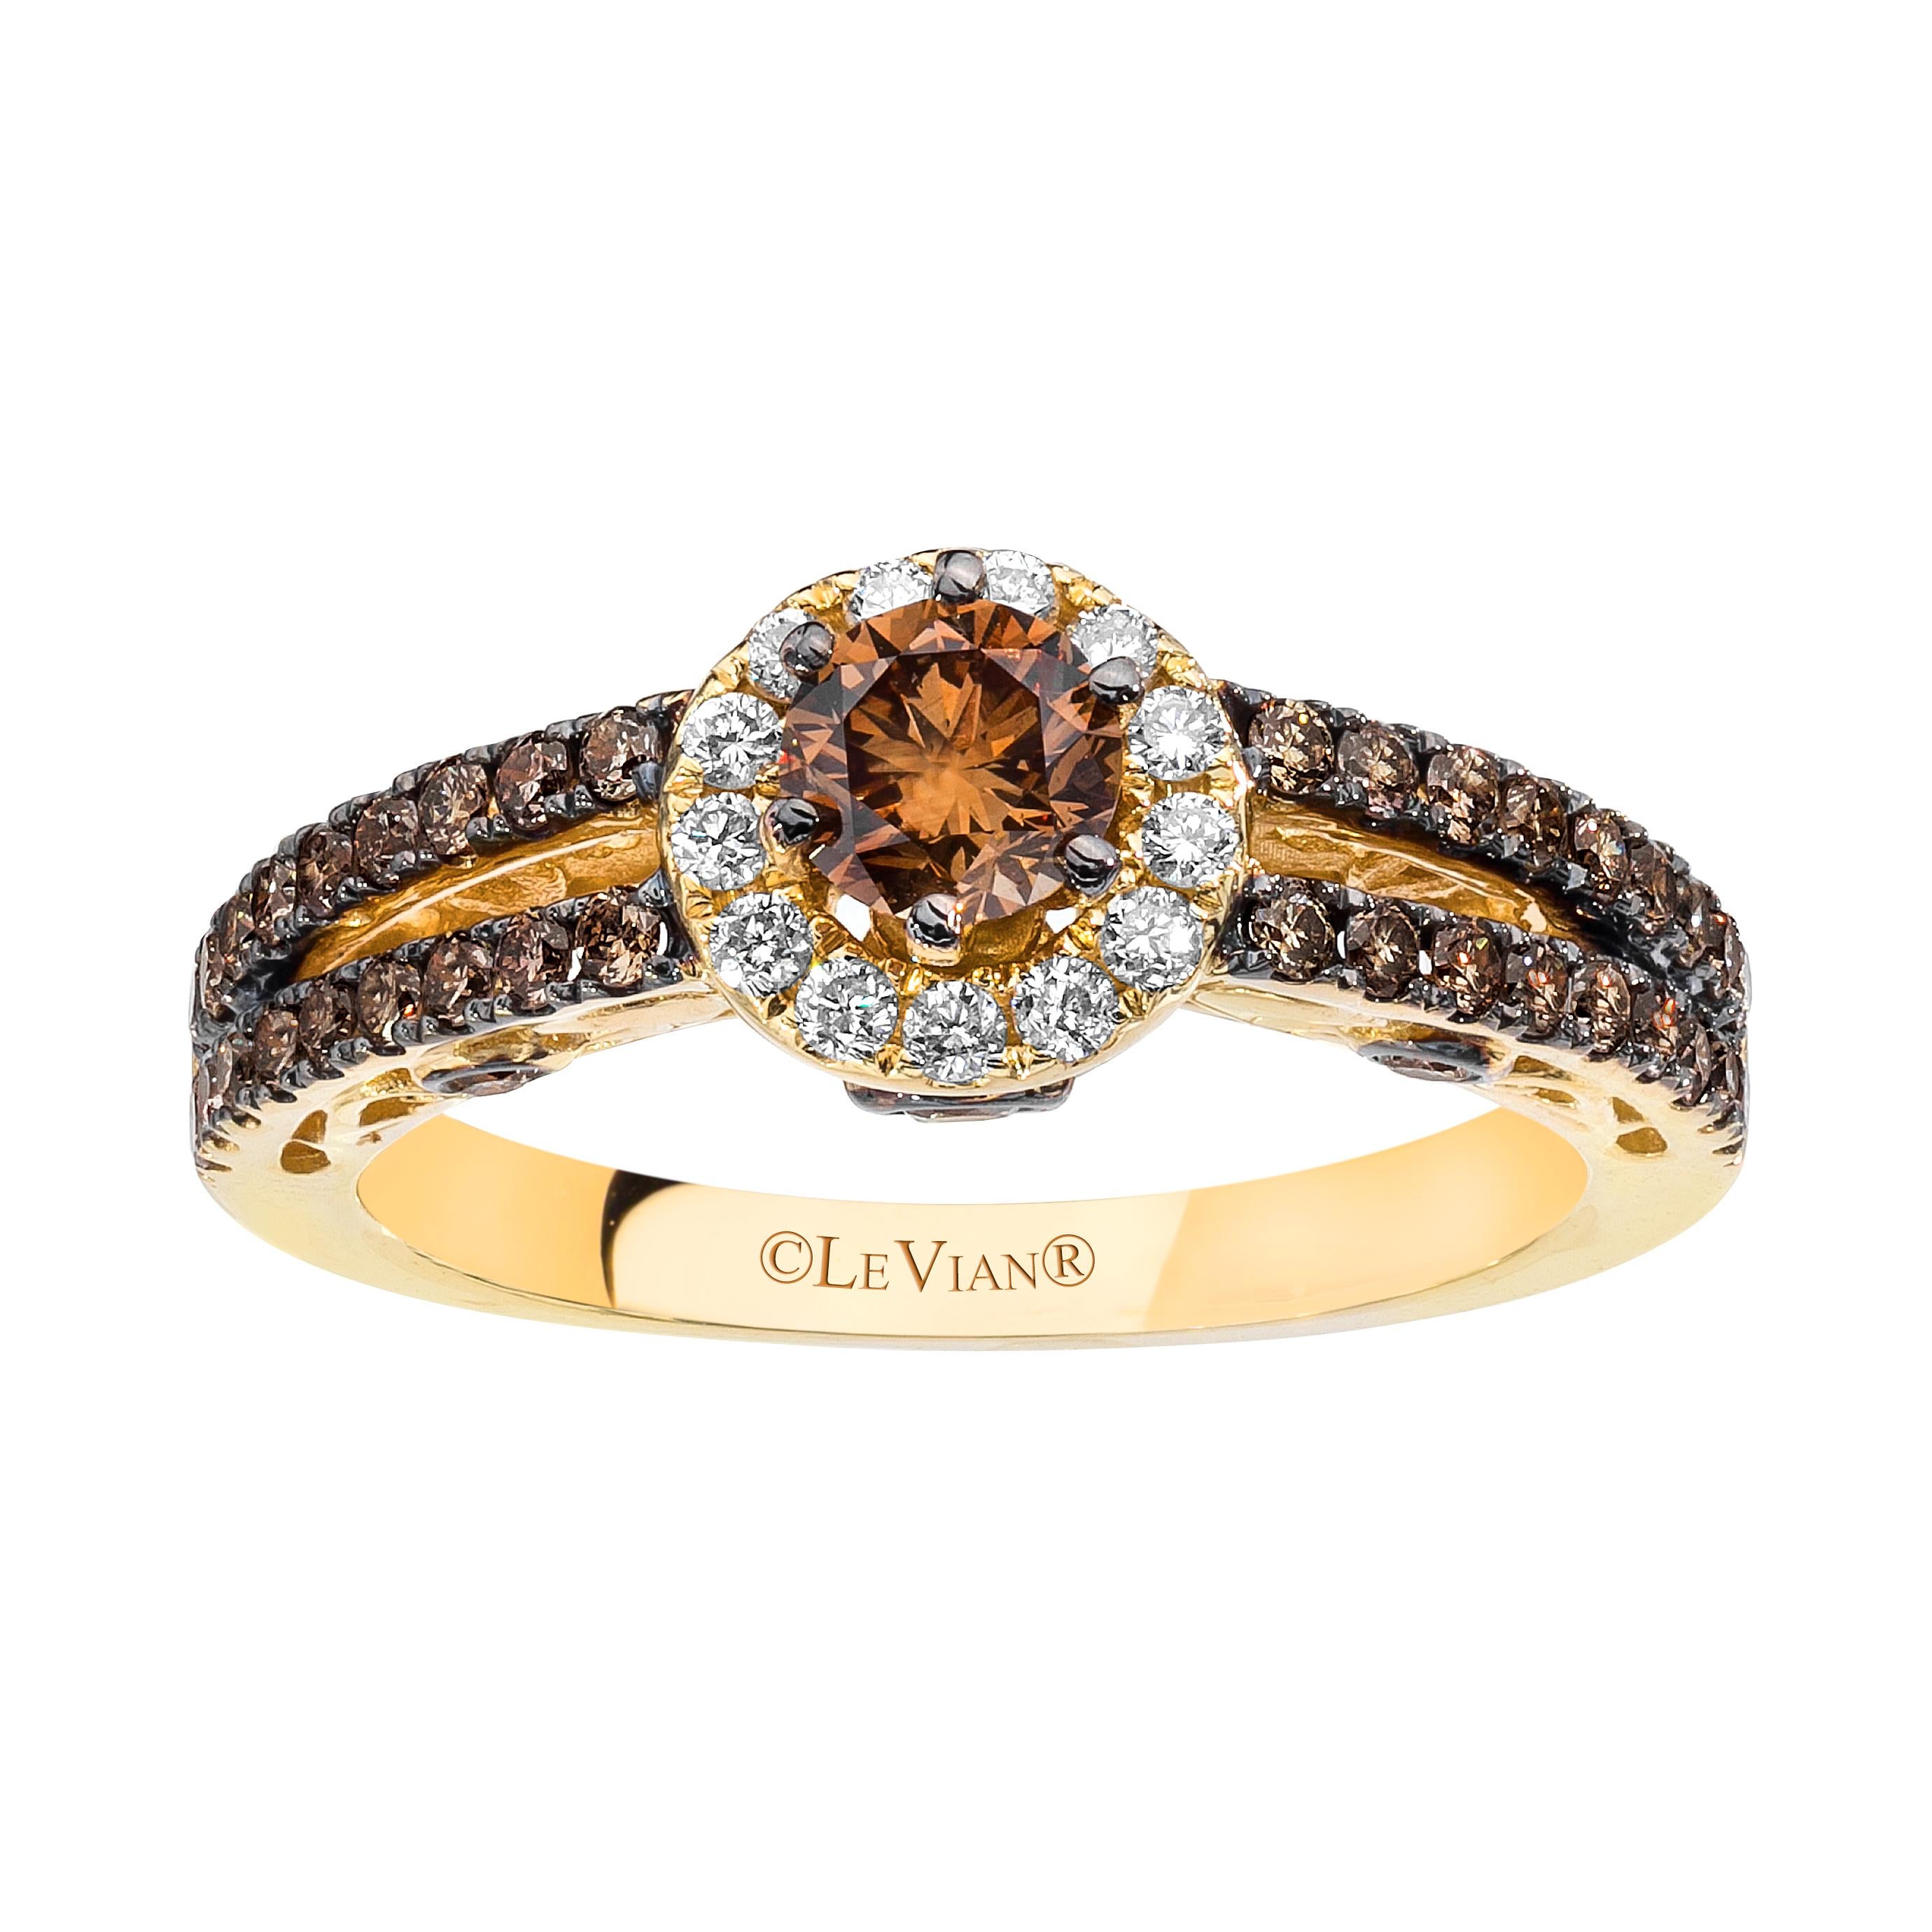 LeVian 14K Yellow Gold Round Chocolate Brown Diamond Halo Bridal Wedding Ring For Sale